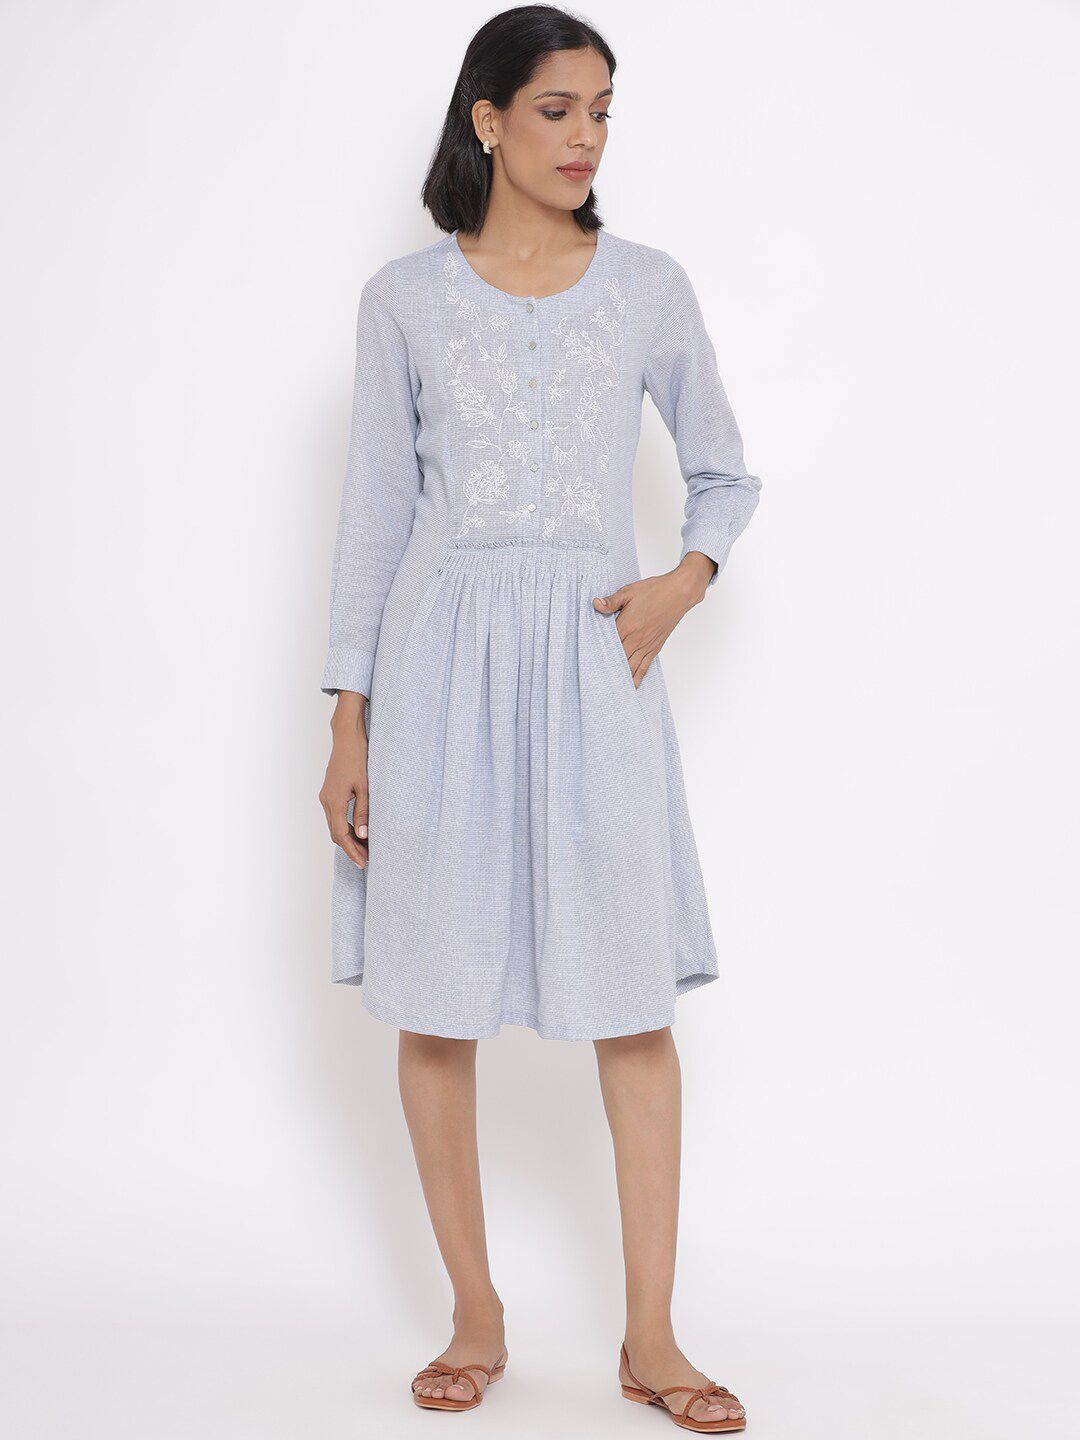 W Women Blue & White Embroidered Fit and Flare Dress Price in India